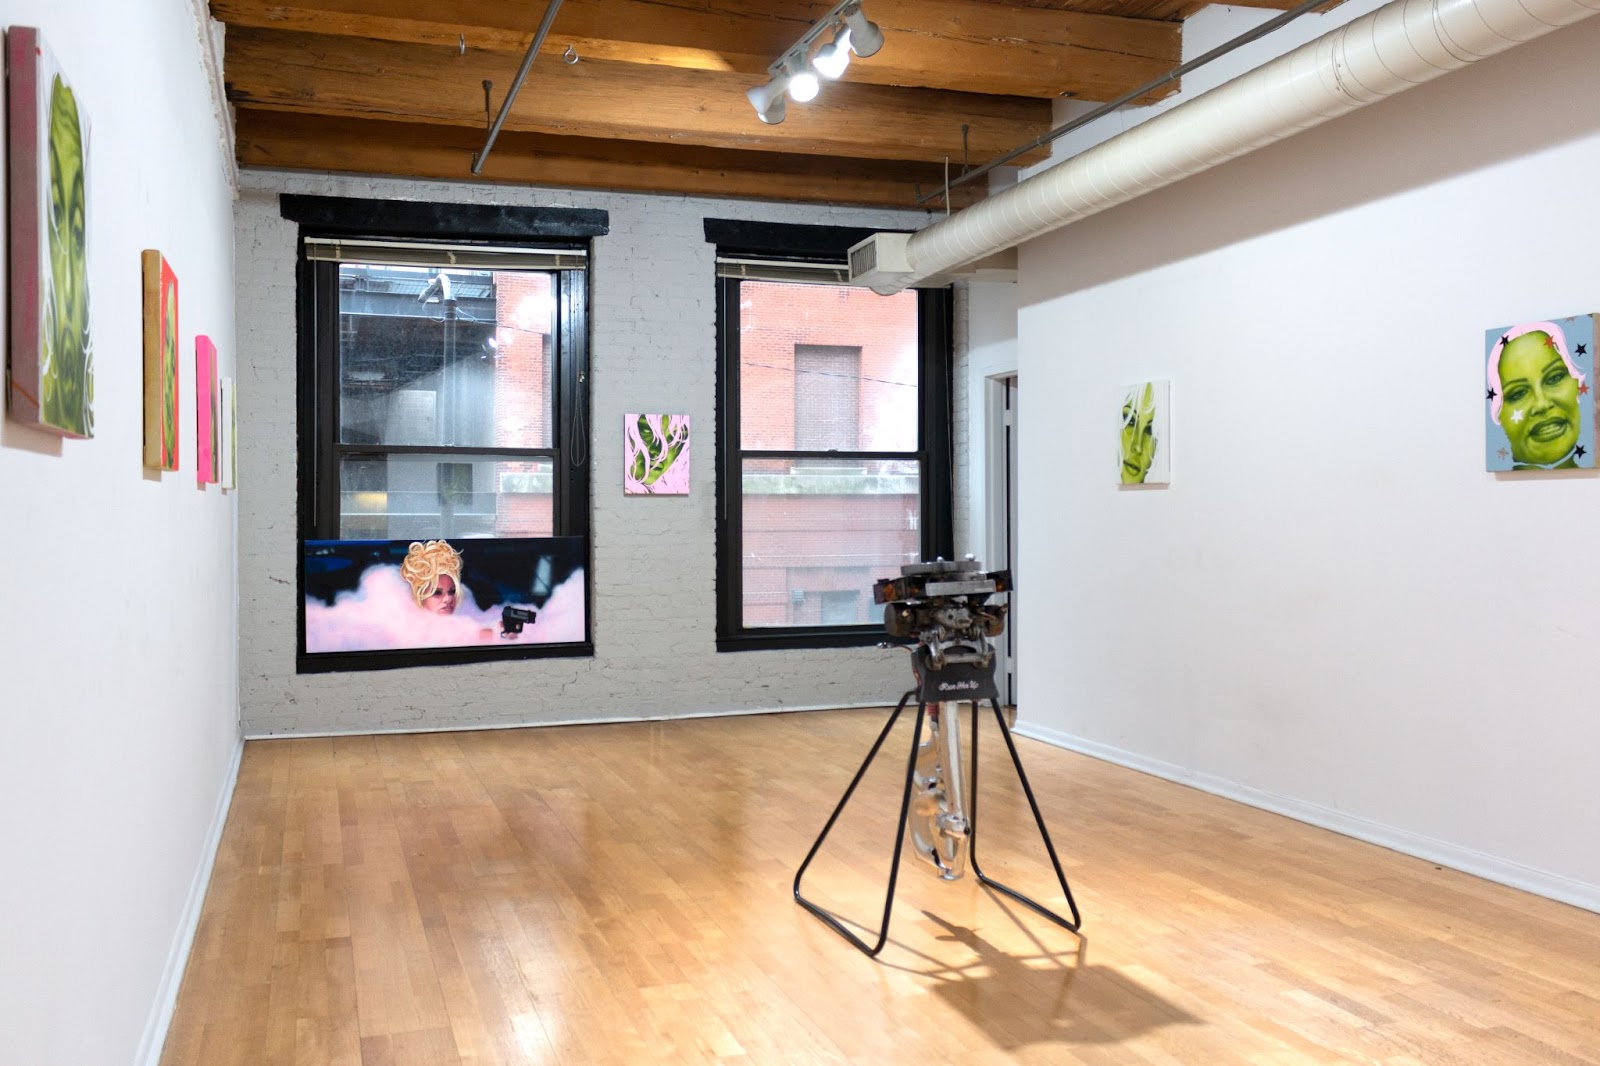 Image: Exhibition view of Liza Jo Eilers' The Care and Keeping of You. In the center of the exhibition space stands a boat motor. Airbrushed portraits of actresses Jennifer Coolidge and Pamela Anderson are hung on the walls surrounding the motor. On the right of the image, a painting of Coolidge rendered in sickly chartreuse green dominates the white wall. To the back of the image, near the windows, Pamela Anderson emerges in frame within a pink cloud of smoke while holding a gun. Courtesy of artist. 